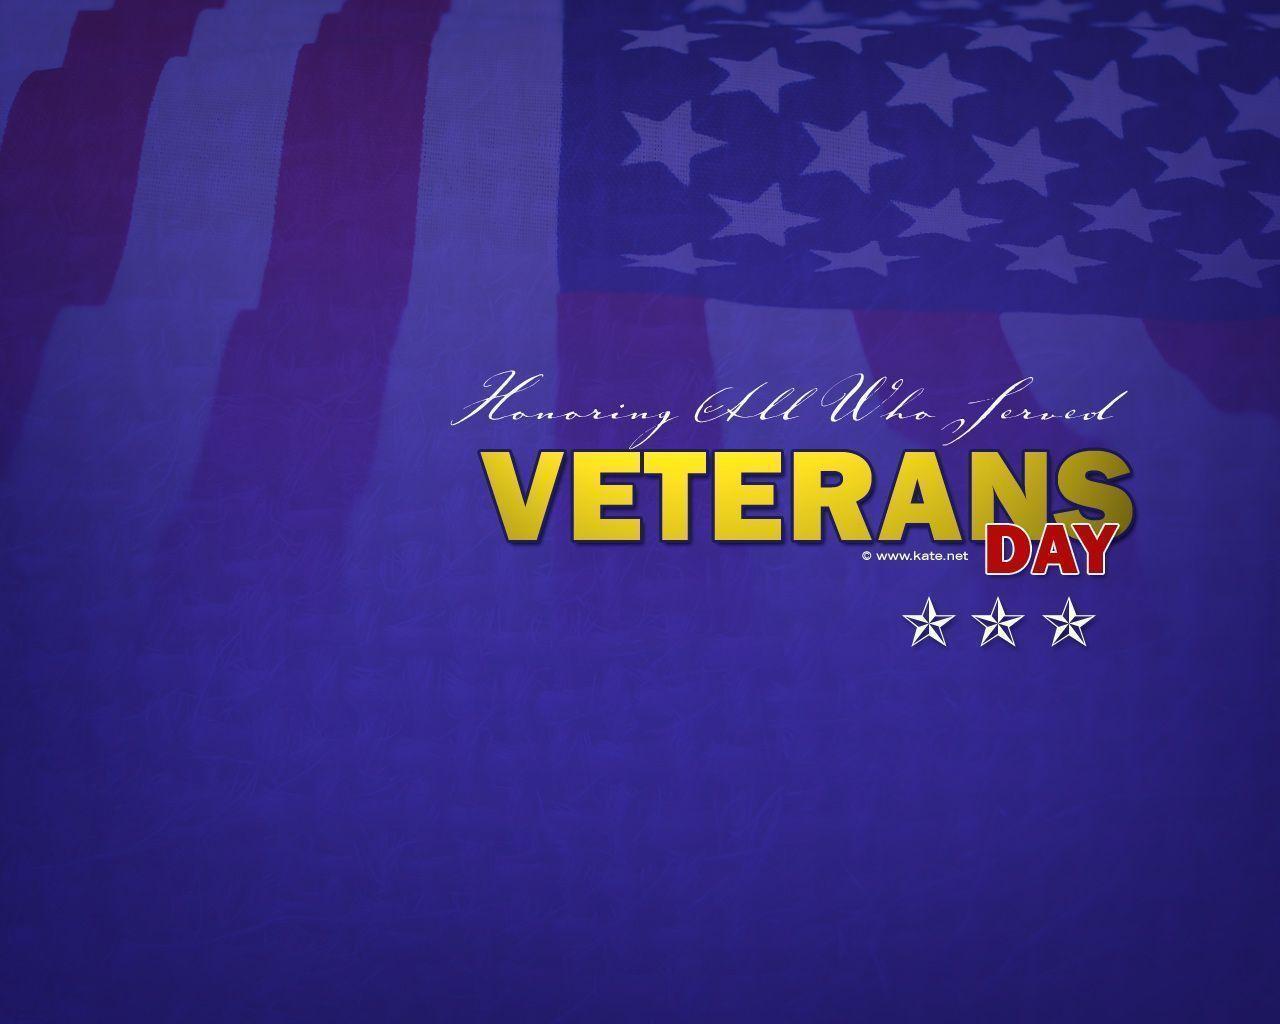 Veterans Day Wallpaper and Facebook Covers, Veterans Day History